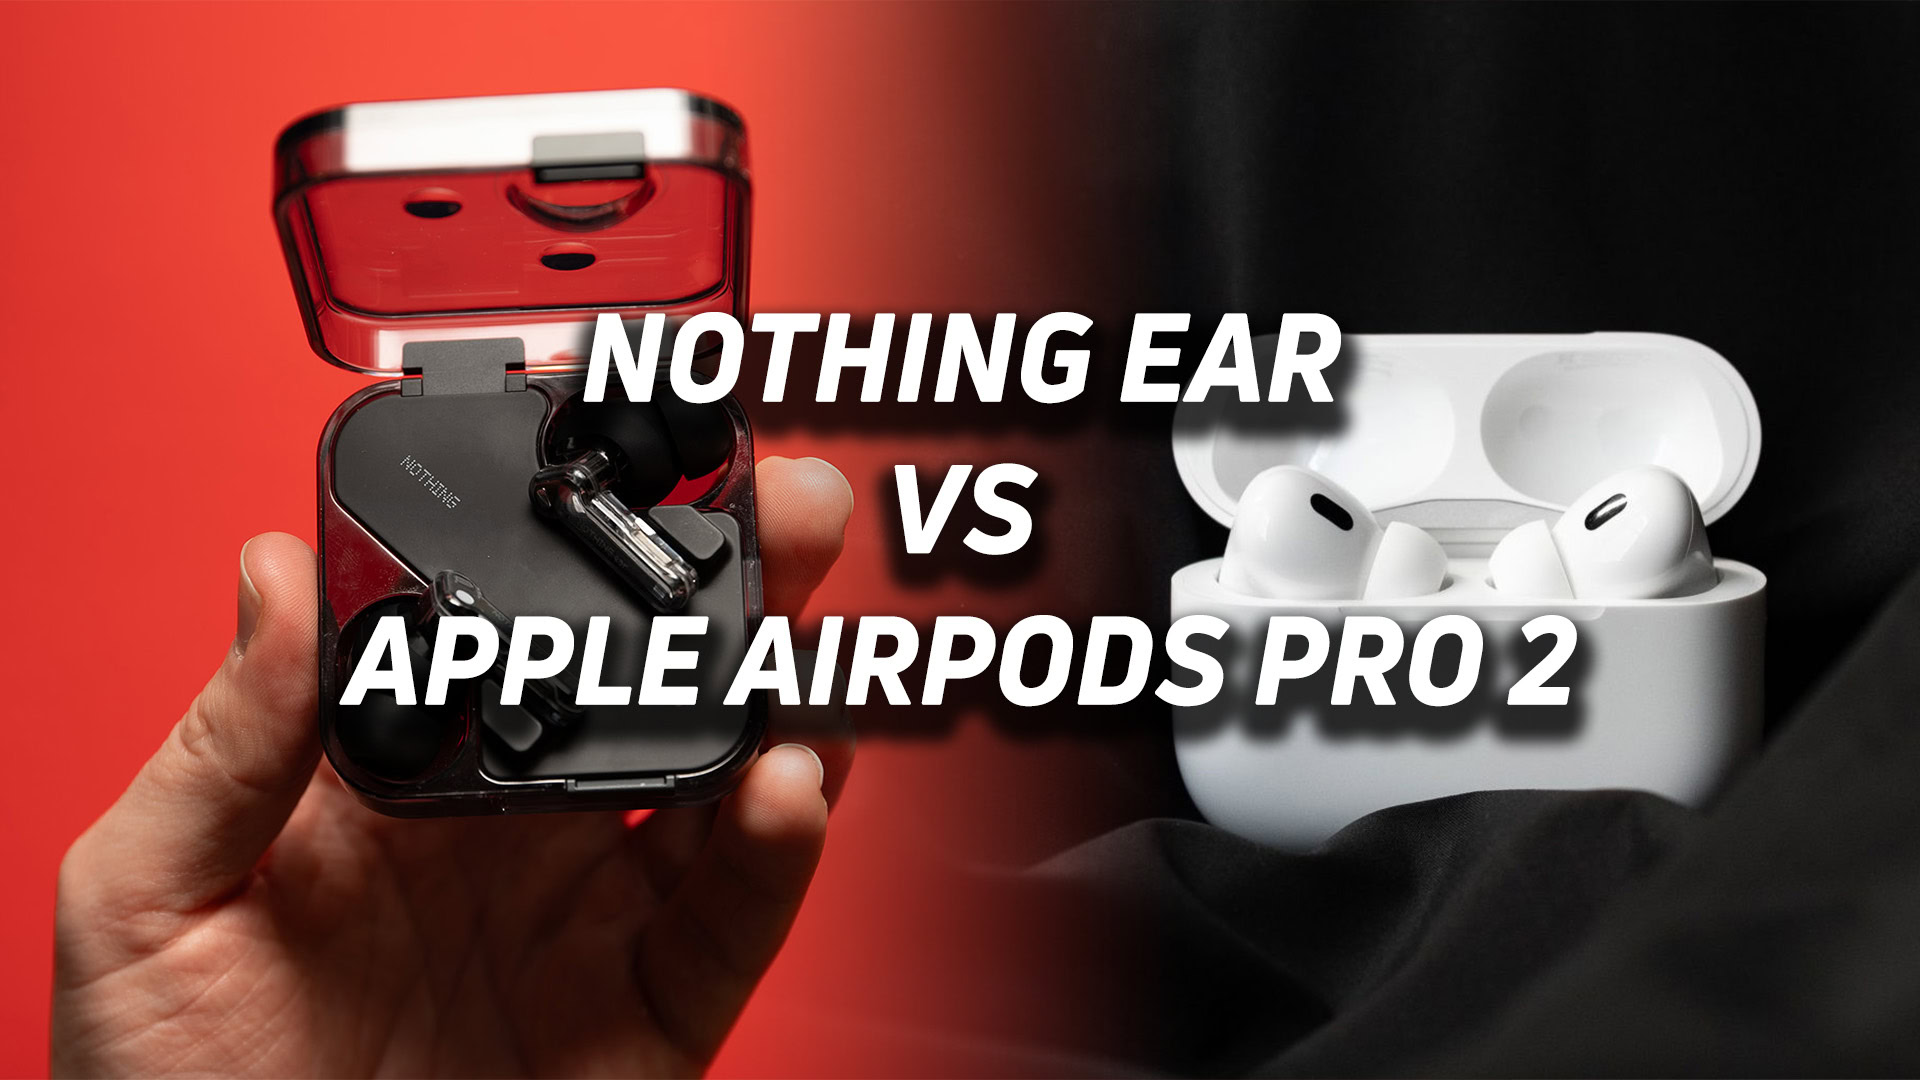 Nothing Ear vs Apple AirPods Pro 2.